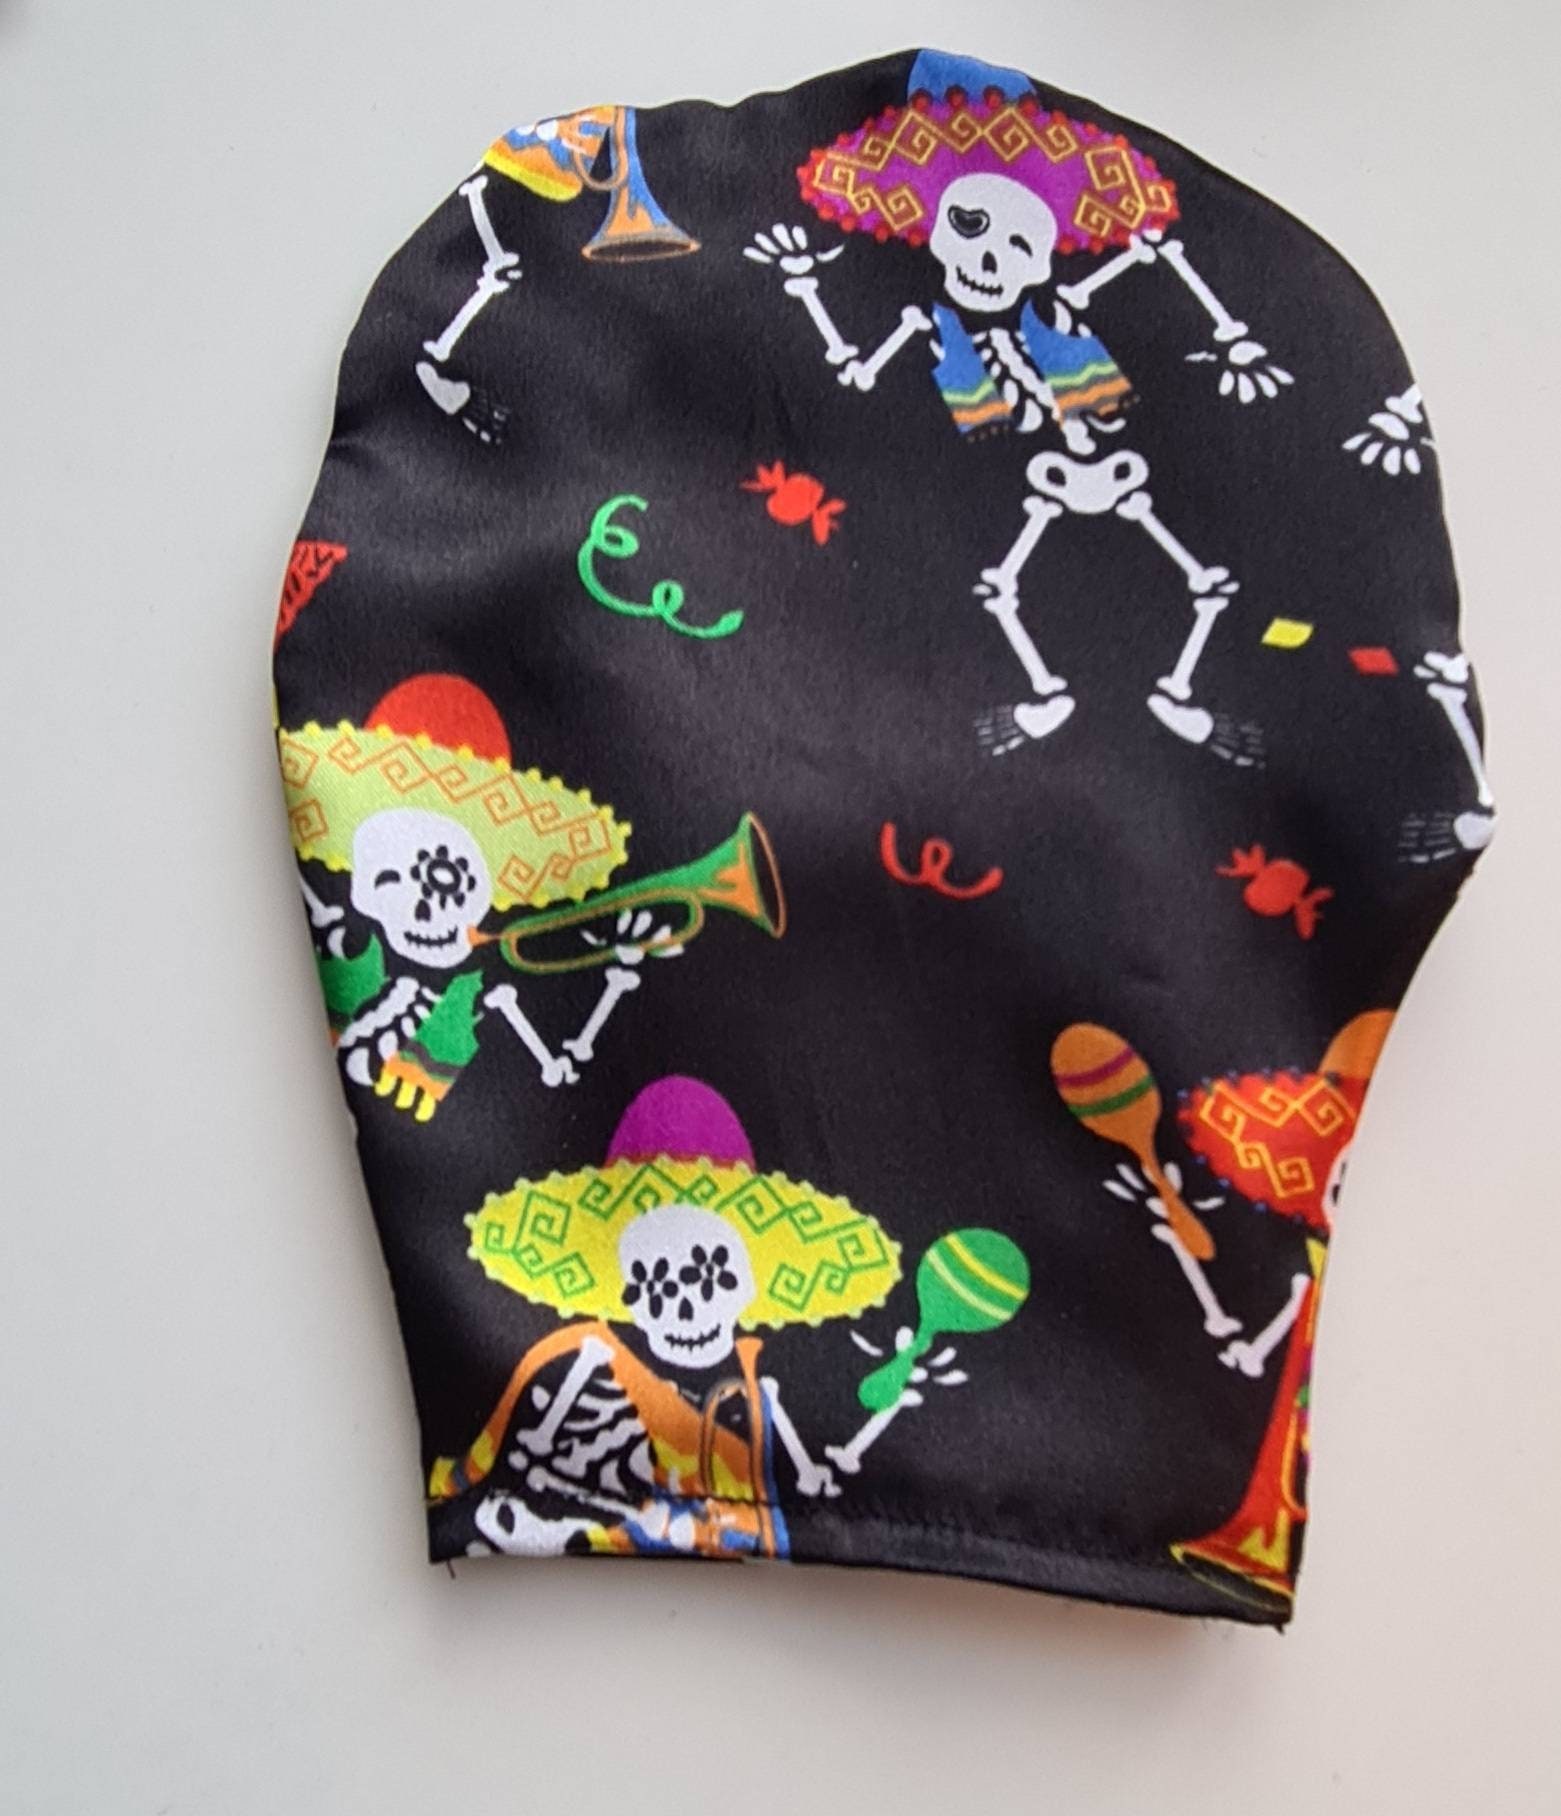 dancing skeletons open bottom Stoma bag pouch cover for Ostomy Ileostomy Colostomy Adult or child size